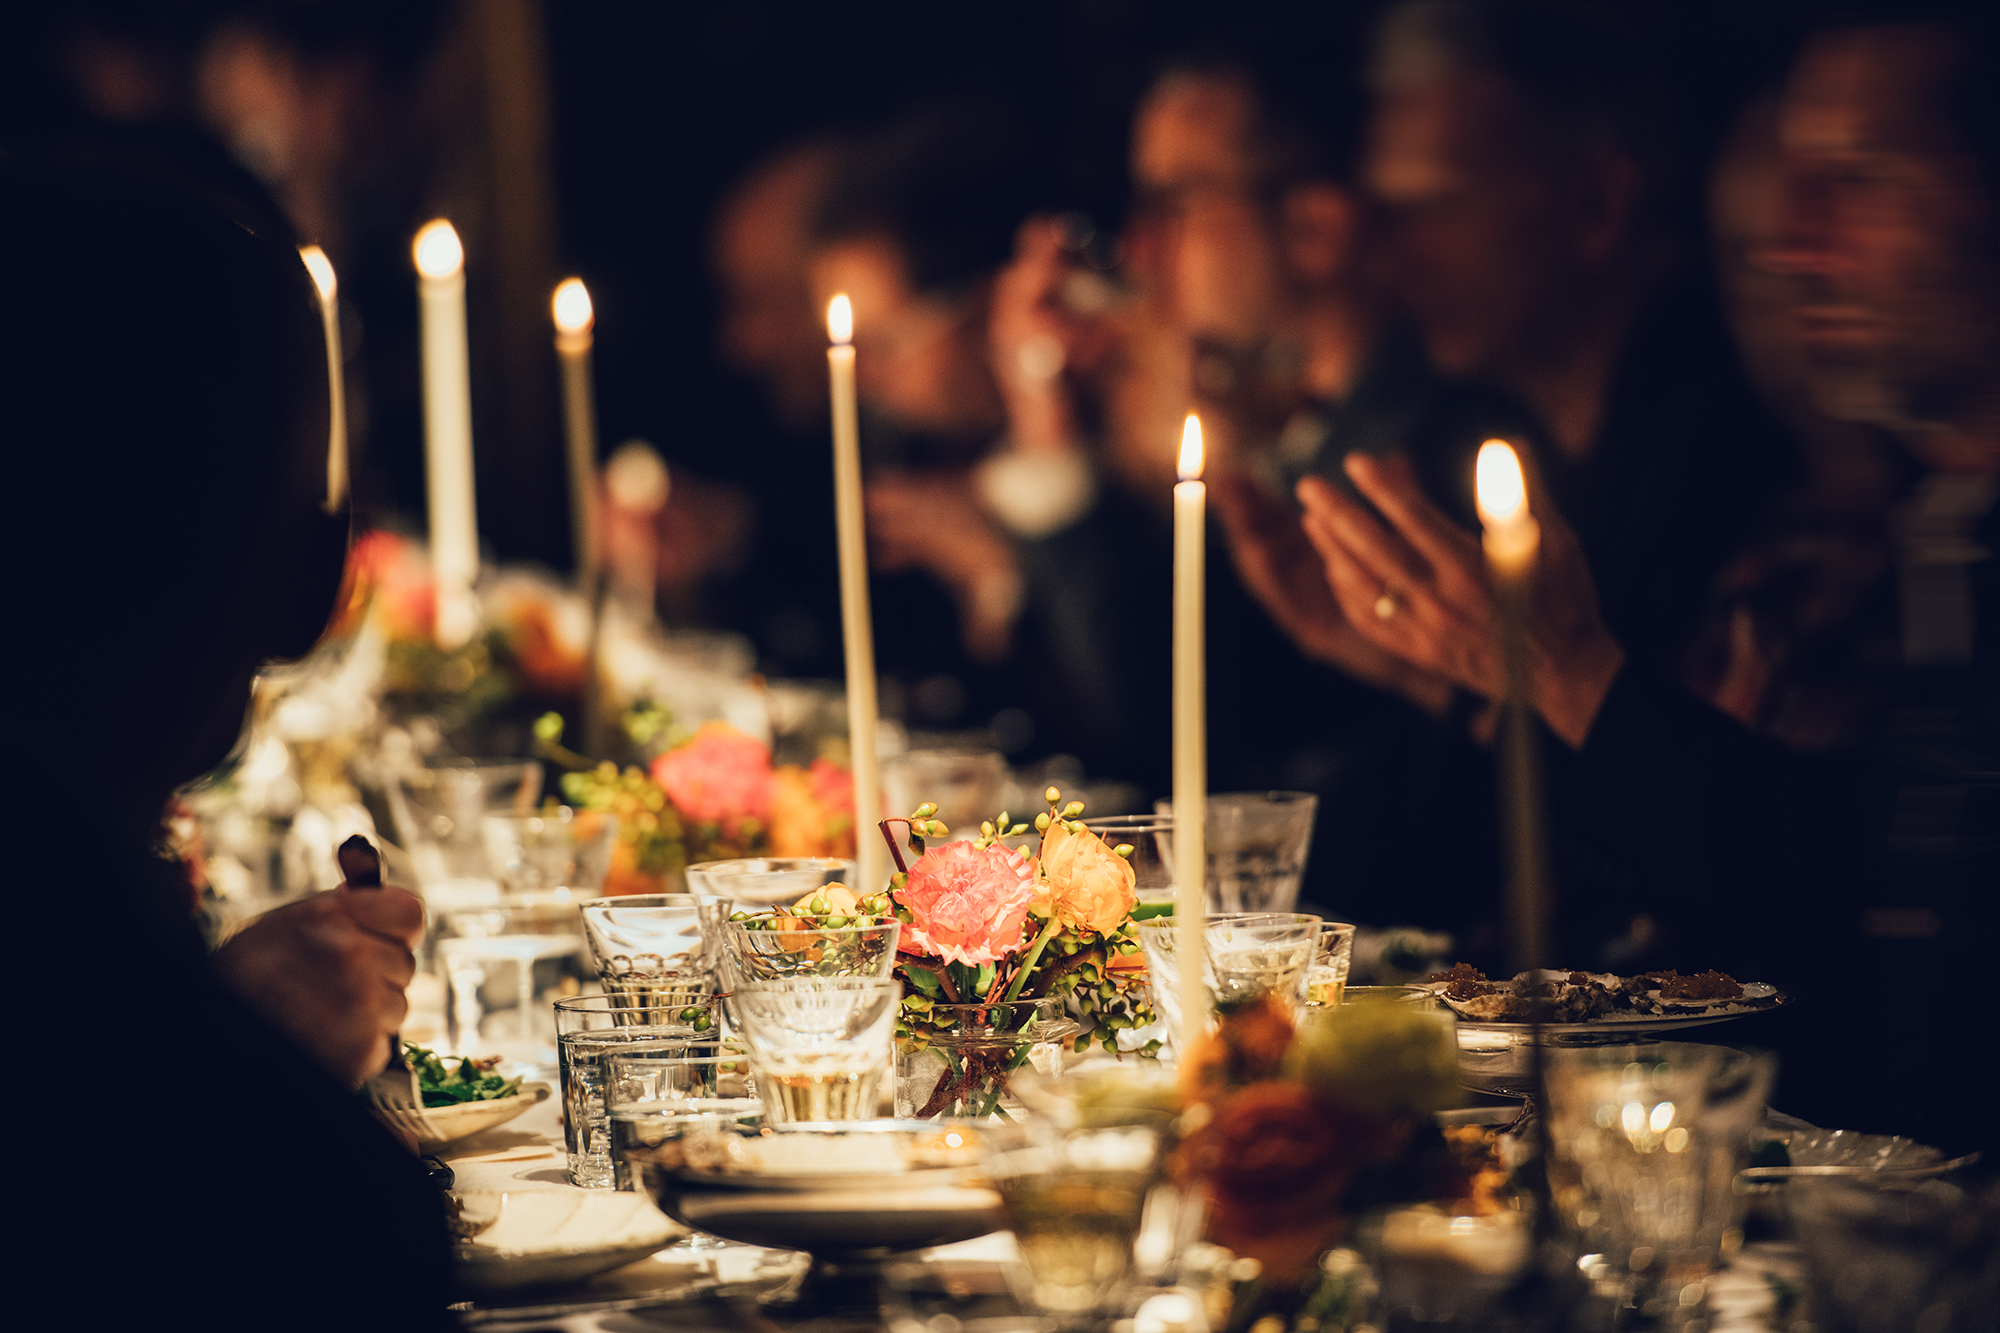 People enjoy a family dinner with candles. Big table served with